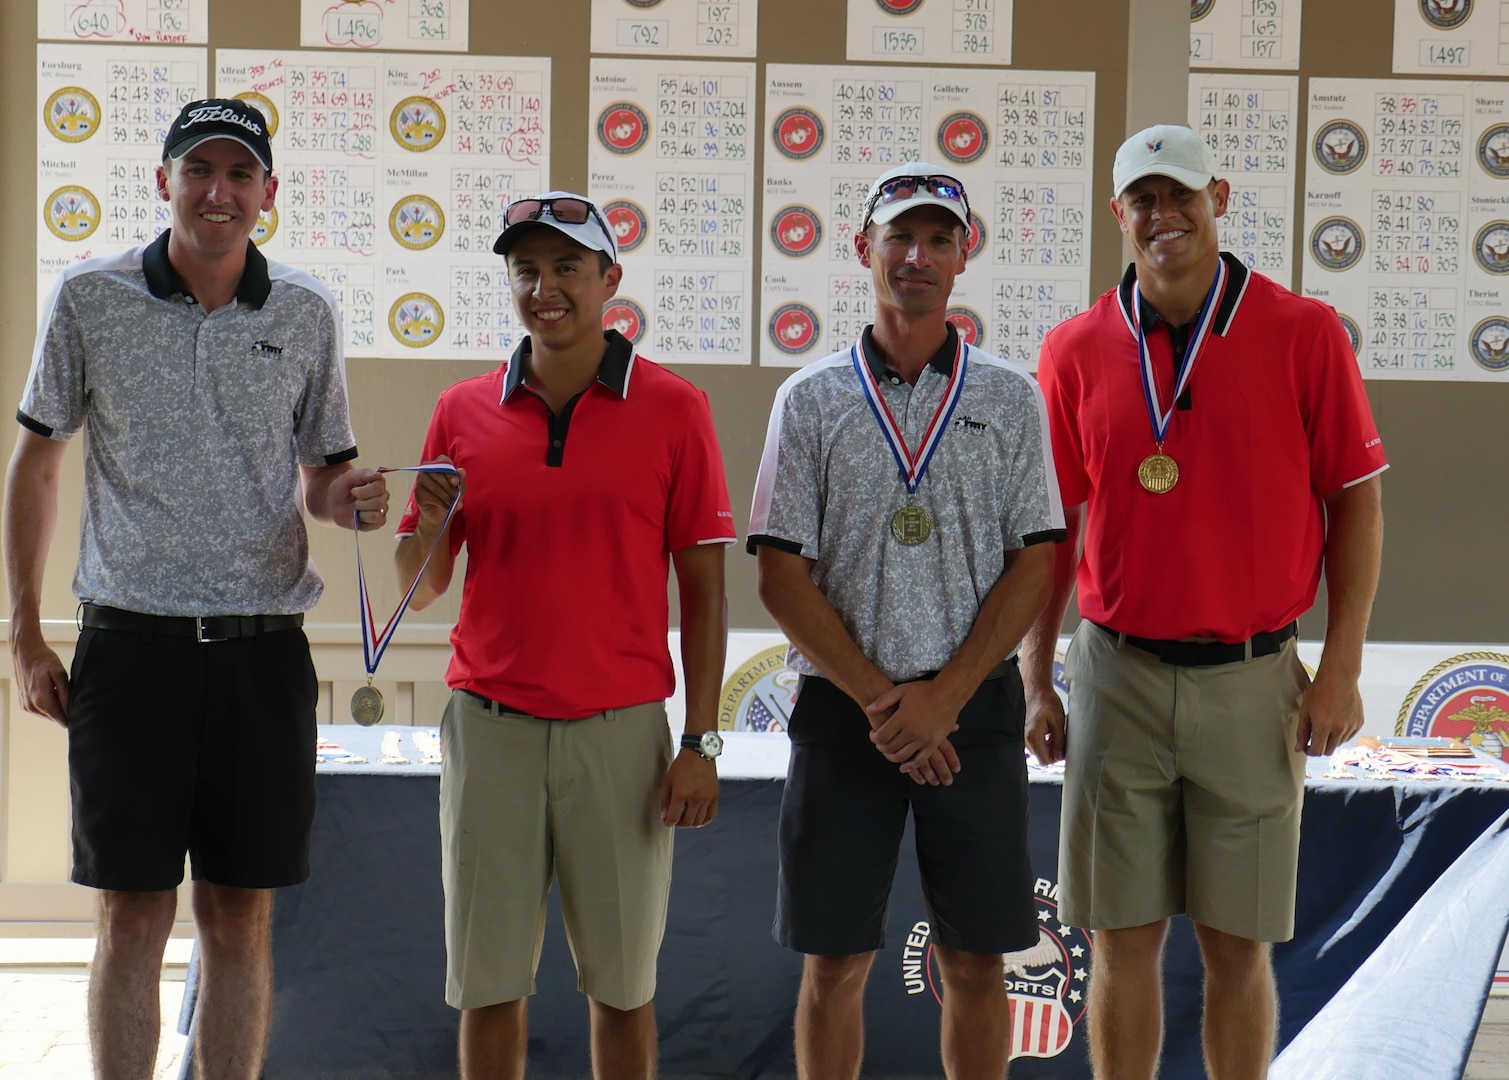 Top men golfers of the 2016 Armed Forces Golf Championship at Fort Jackson, S.C. 20-23 August.  From left to right:  Bronze medalists (tied) Army Capt Ryan Allred of West Point, N.Y. and Air Force 1st Lt Miguel Macias of Wright-Patterson AFB, Ohio; Silver medalist Army Chief Warrant Officer 3 Brian King of Fort Rucker, Ala.; and 2016 Champion, Air Force 1st Lt. Kyle Westmoreland of Charleston AFB, SC